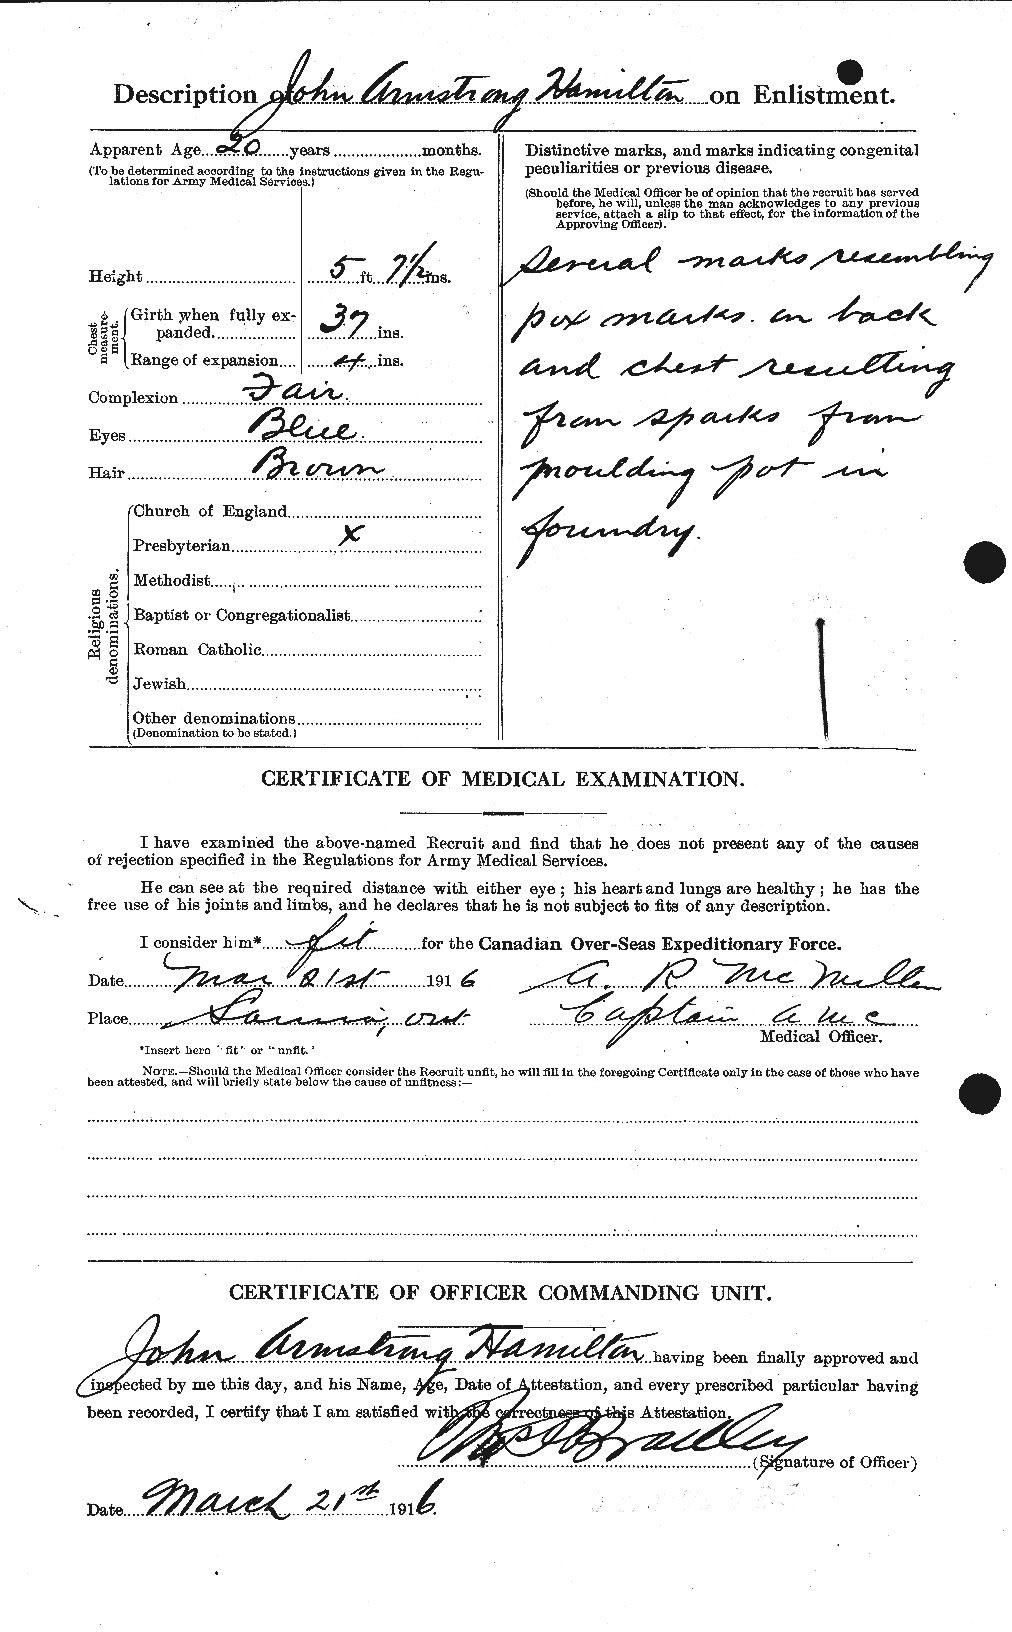 Personnel Records of the First World War - CEF 373066b